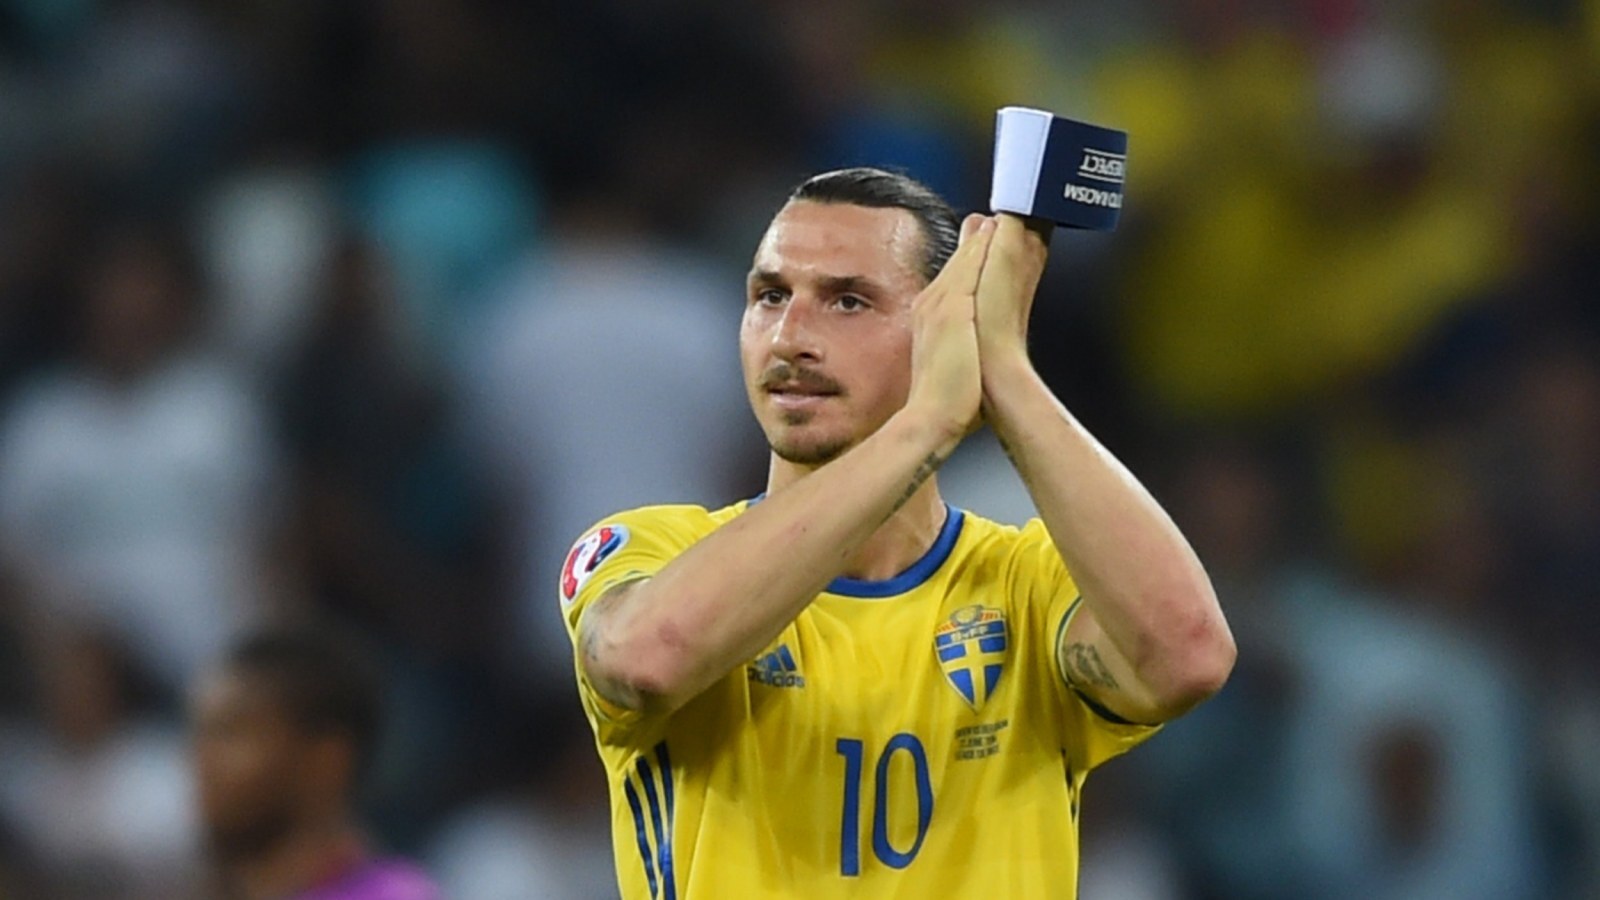 Ibrahimovic might thrill Swedish soccer fans again if he is named as a squad for World Cup qualifiers